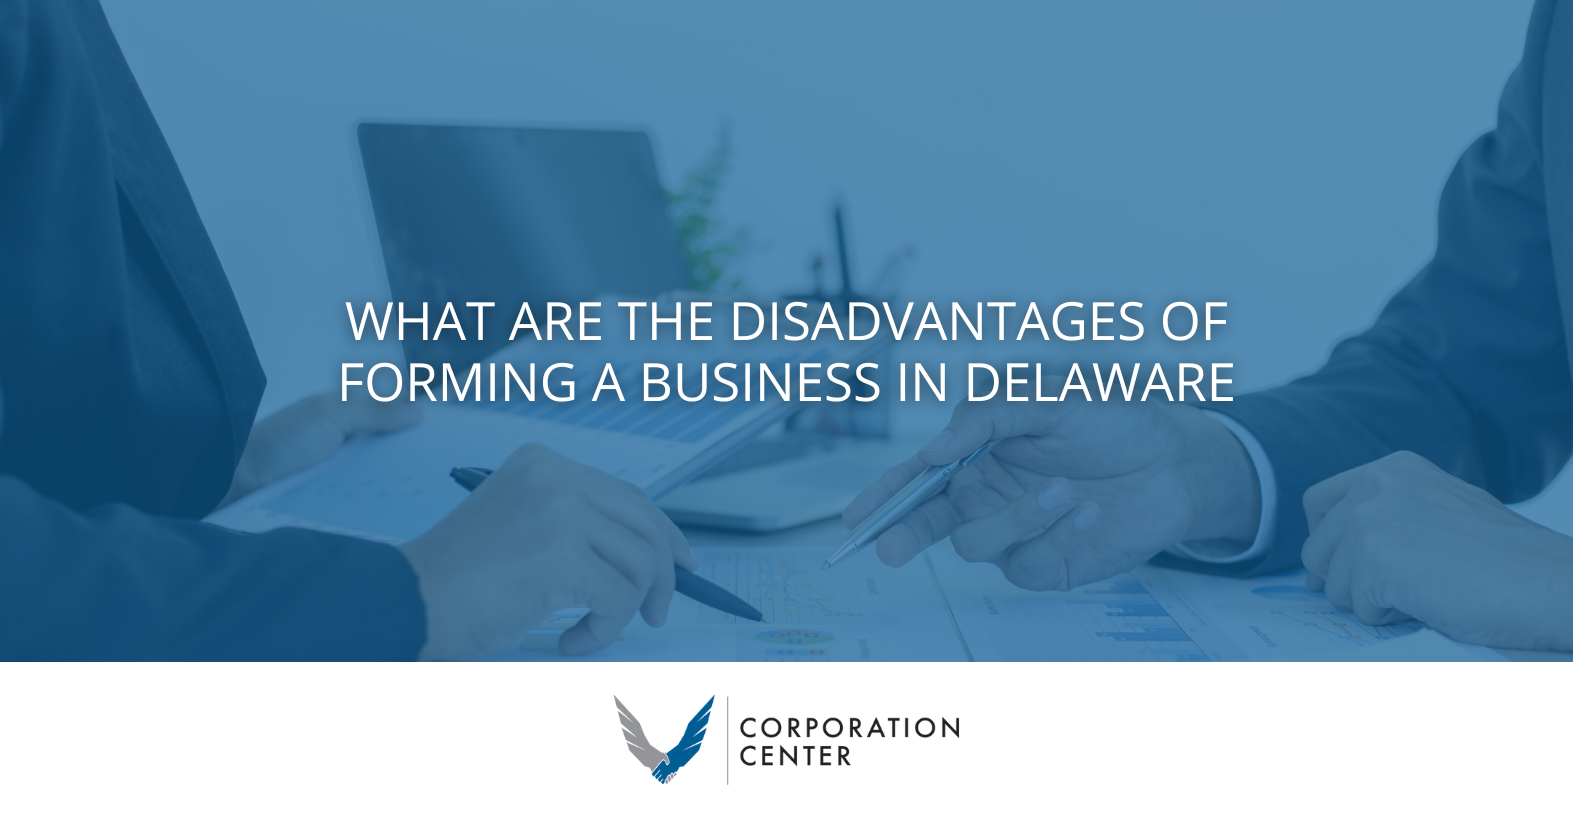 Forming a Business in Delaware